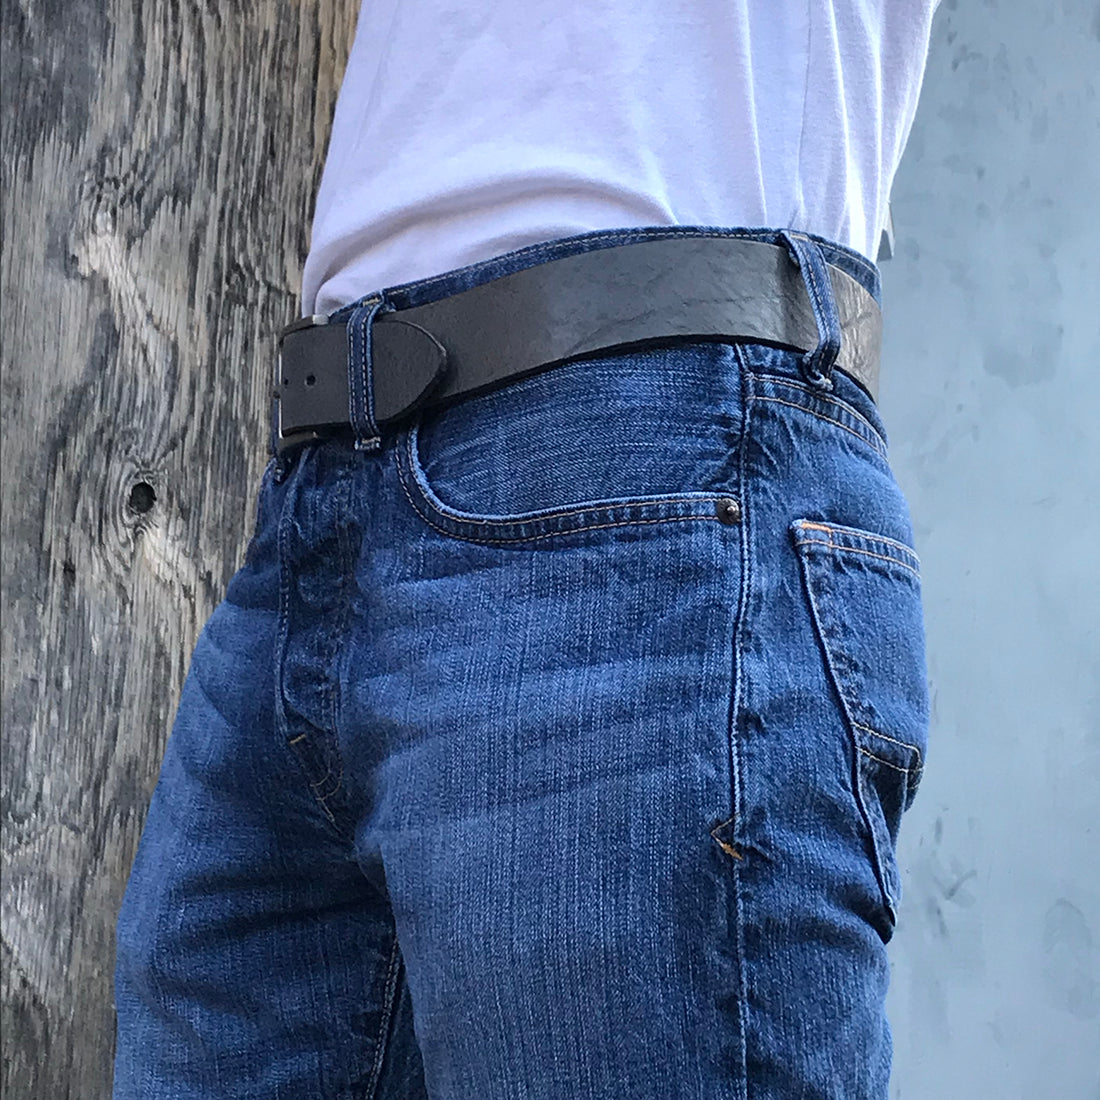 Handmade Leather Belt | Patented Curved Belt by Embrazio